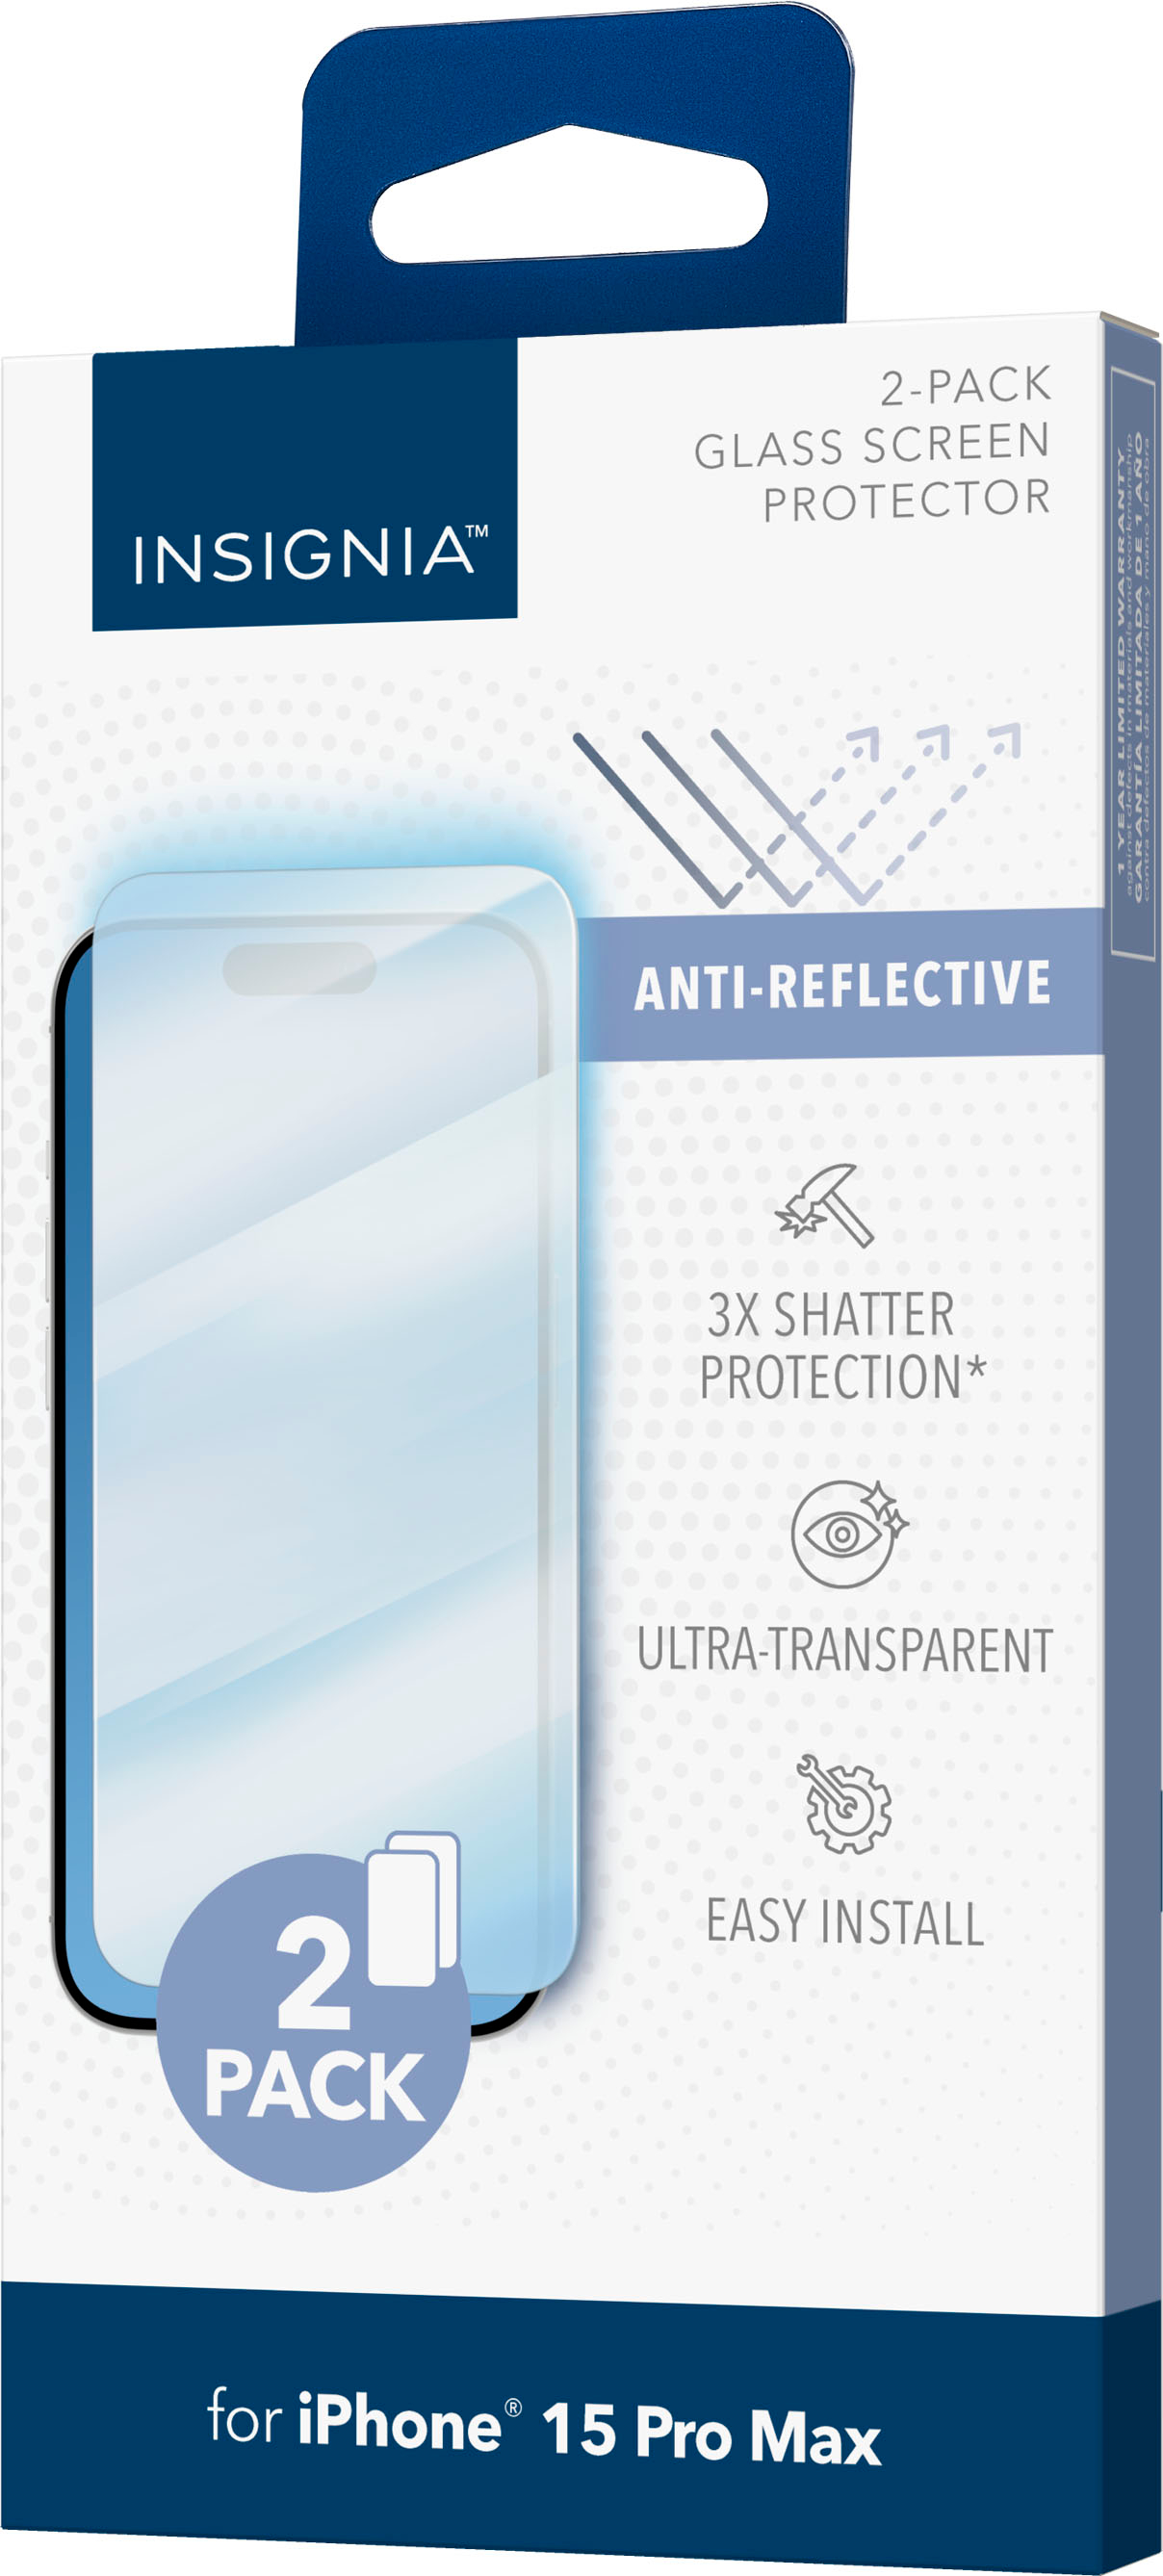 Insignia™ Anti-Reflective Glass Screen Protector for iPhone 15 Pro Max  (2-Pack) Clear NS-15PMGLS2 - Best Buy